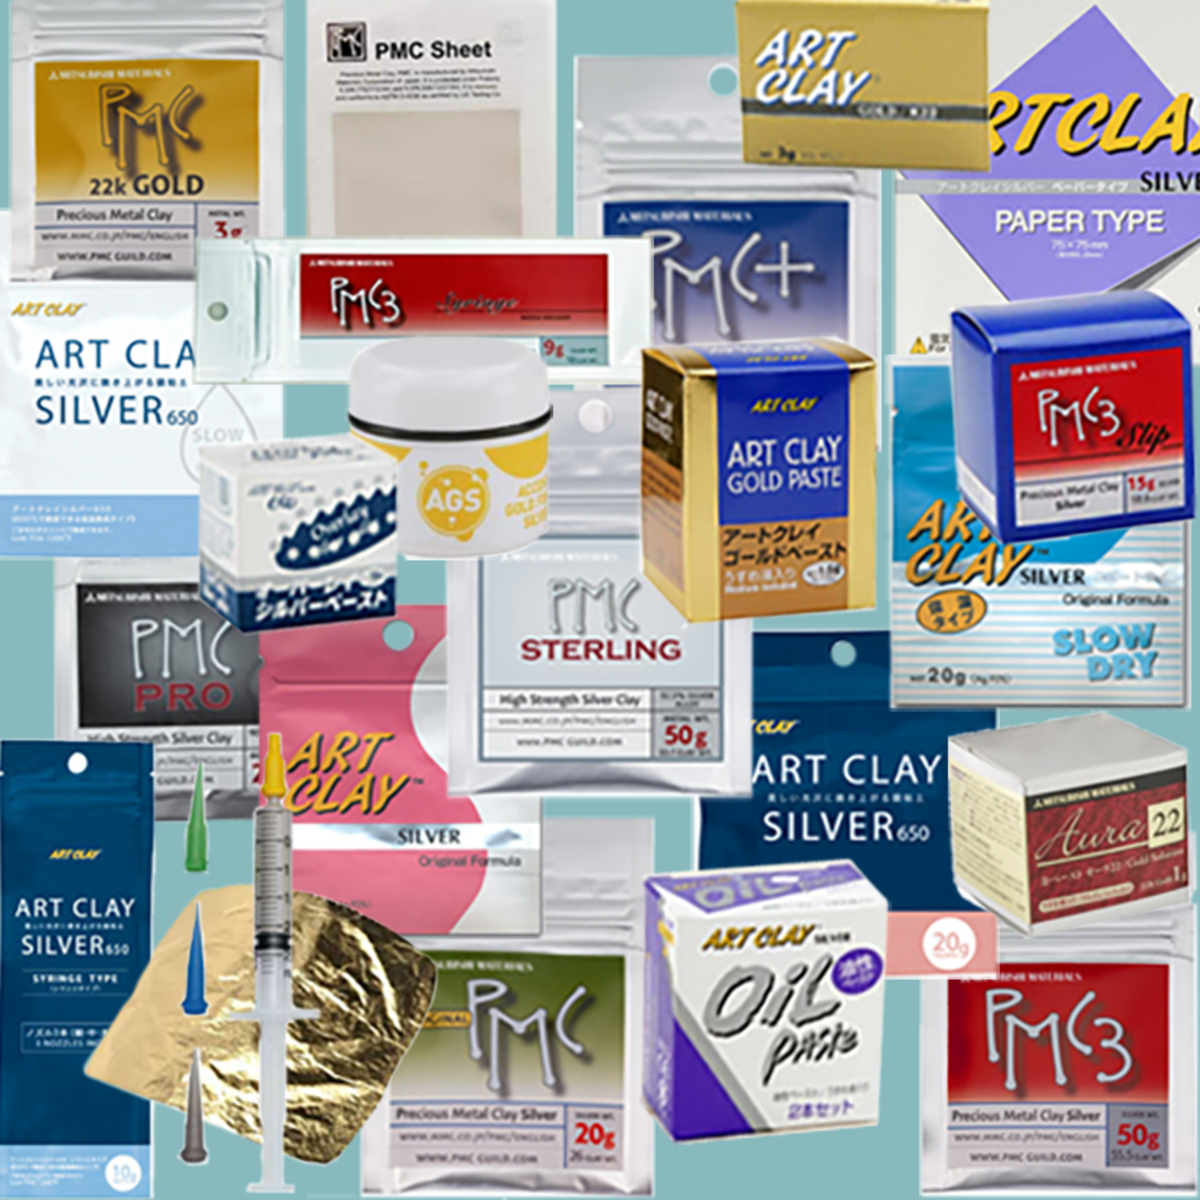 Art Clay Silver 50gm + 10% Bonus Clay Pack. Now Available!!! – Art Clay  World America